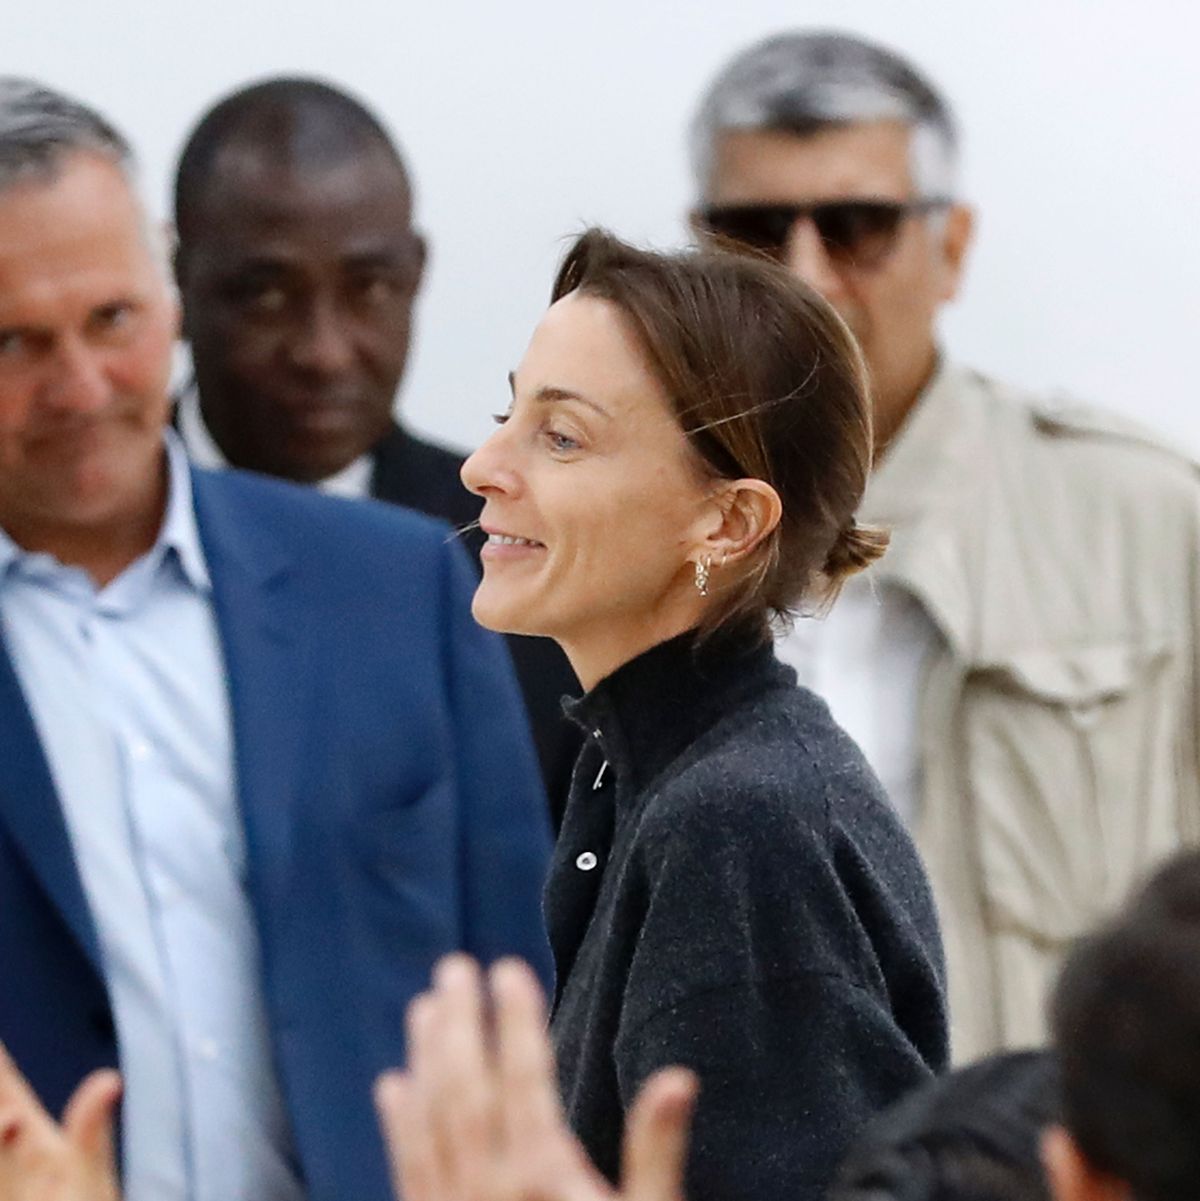 Phoebe Philo and her husband are seen backstage during the Chloe show   おしゃれな女性, ファッション, ファッションアイデア